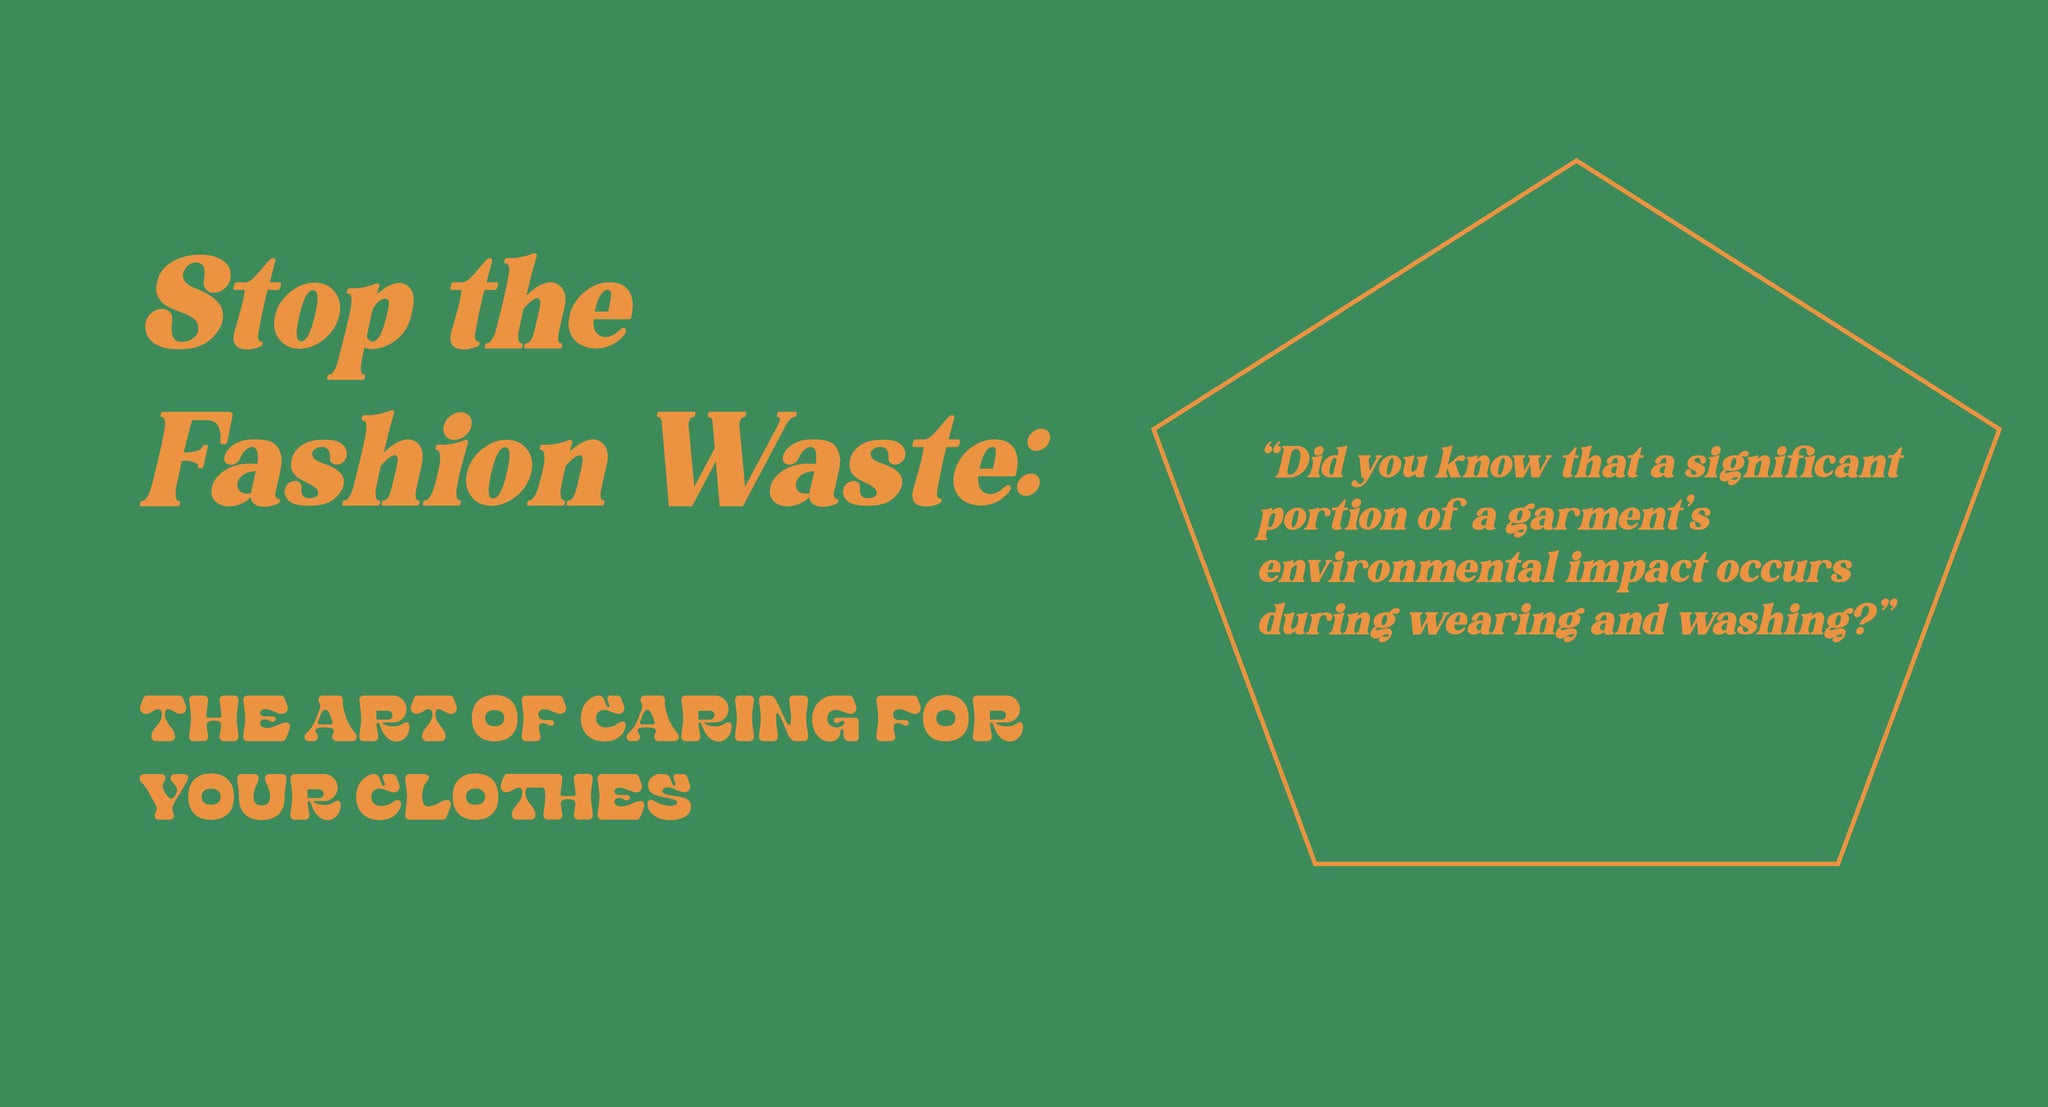 Stop the Fashion Waste: The Art of Caring for Your Clothes